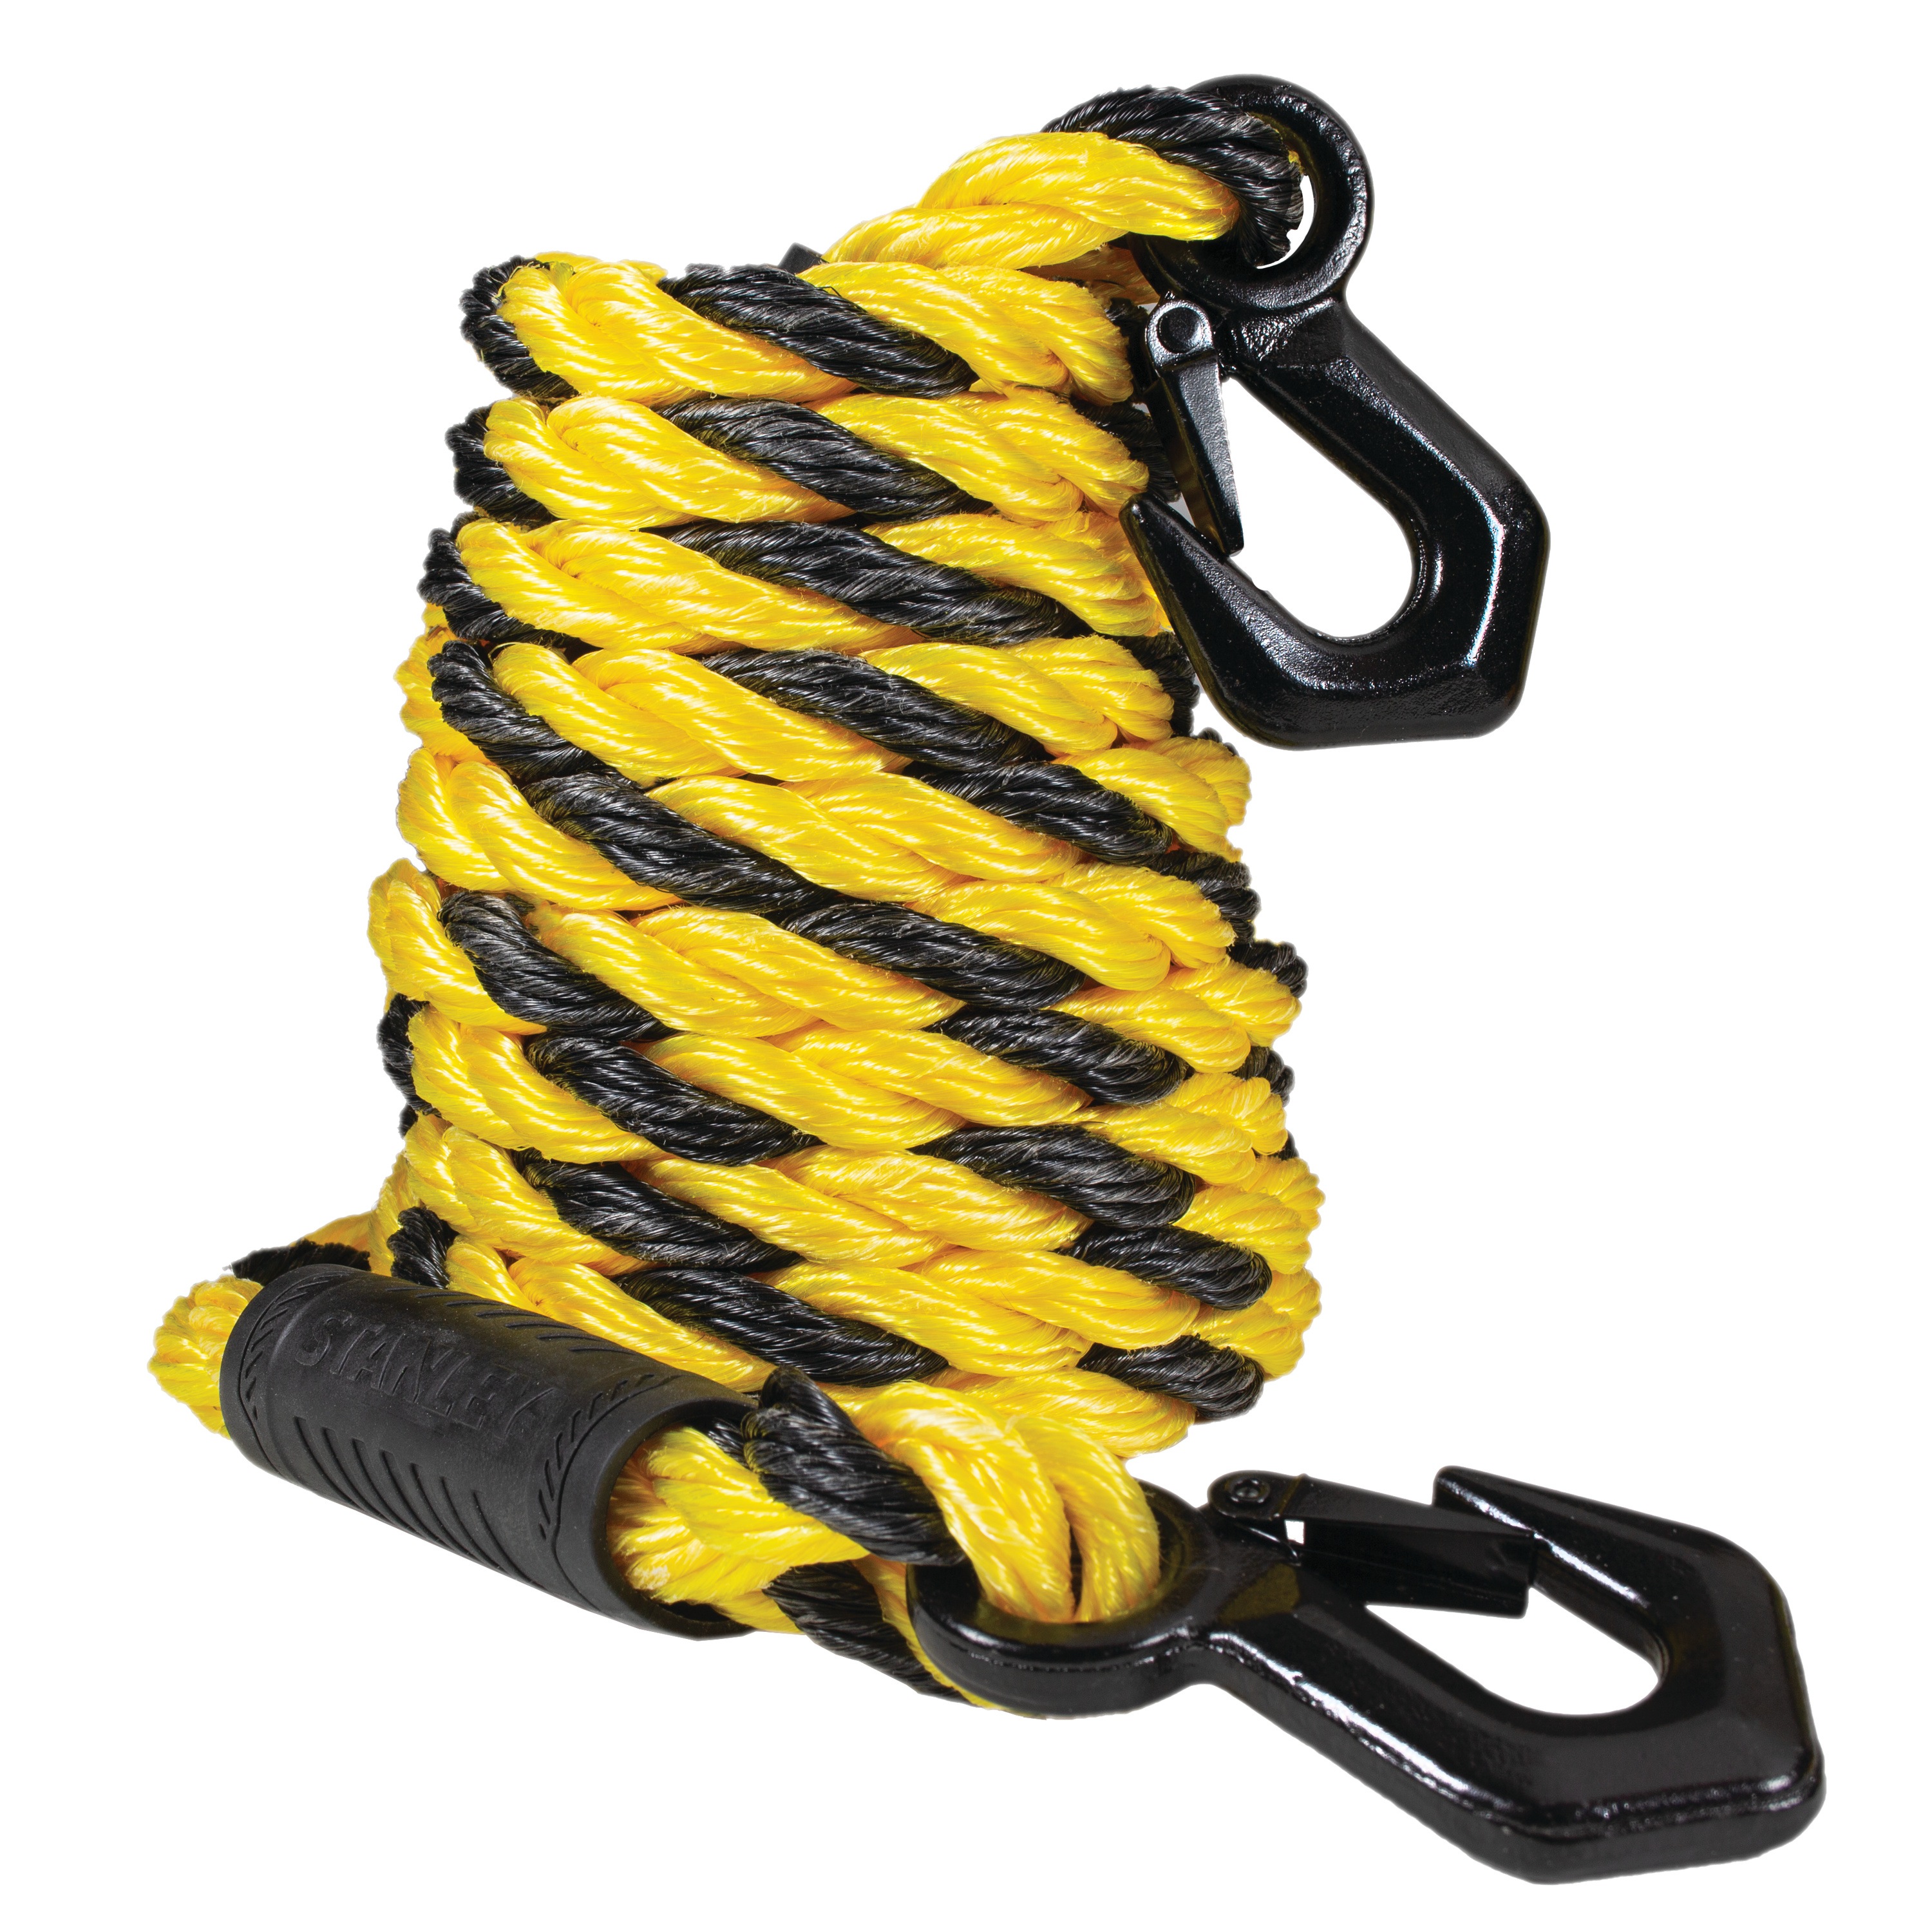 Stanley Tools - 15 ft x 58 in PolyBlend Braided Tow Rope wTriHook - S1052